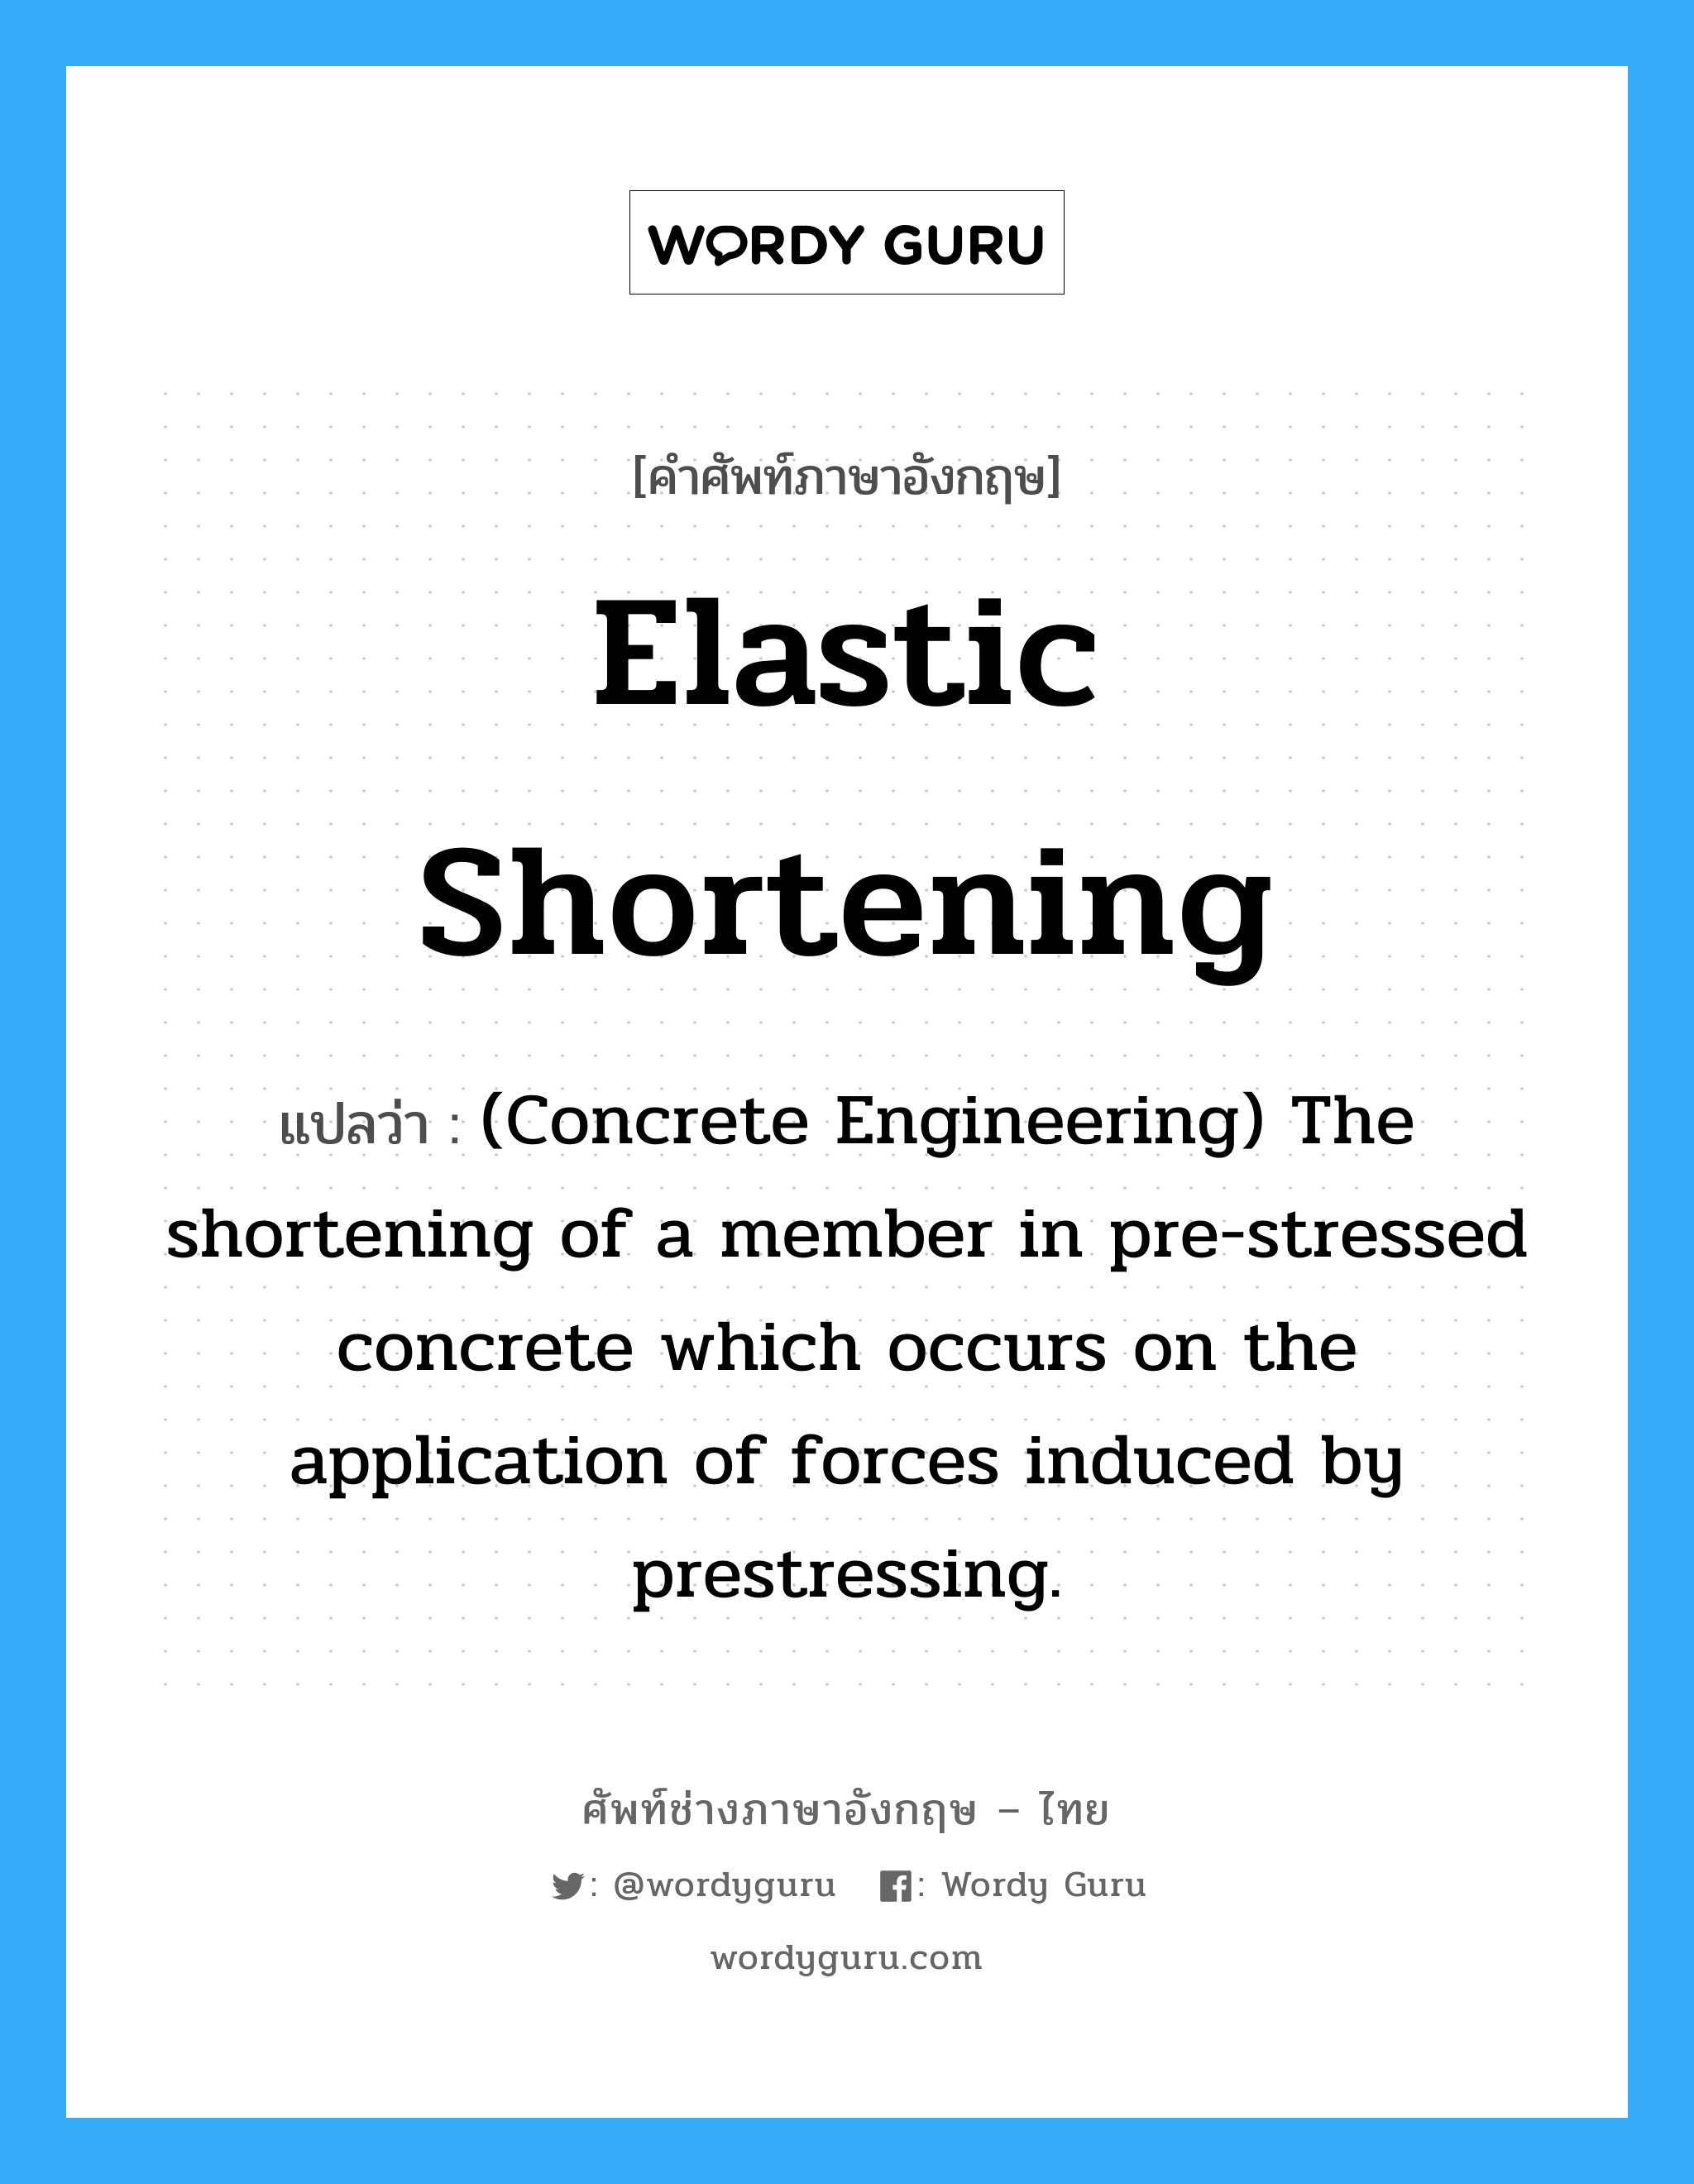 Elastic Shortening แปลว่า?, คำศัพท์ช่างภาษาอังกฤษ - ไทย Elastic Shortening คำศัพท์ภาษาอังกฤษ Elastic Shortening แปลว่า (Concrete Engineering) The shortening of a member in pre-stressed concrete which occurs on the application of forces induced by prestressing.